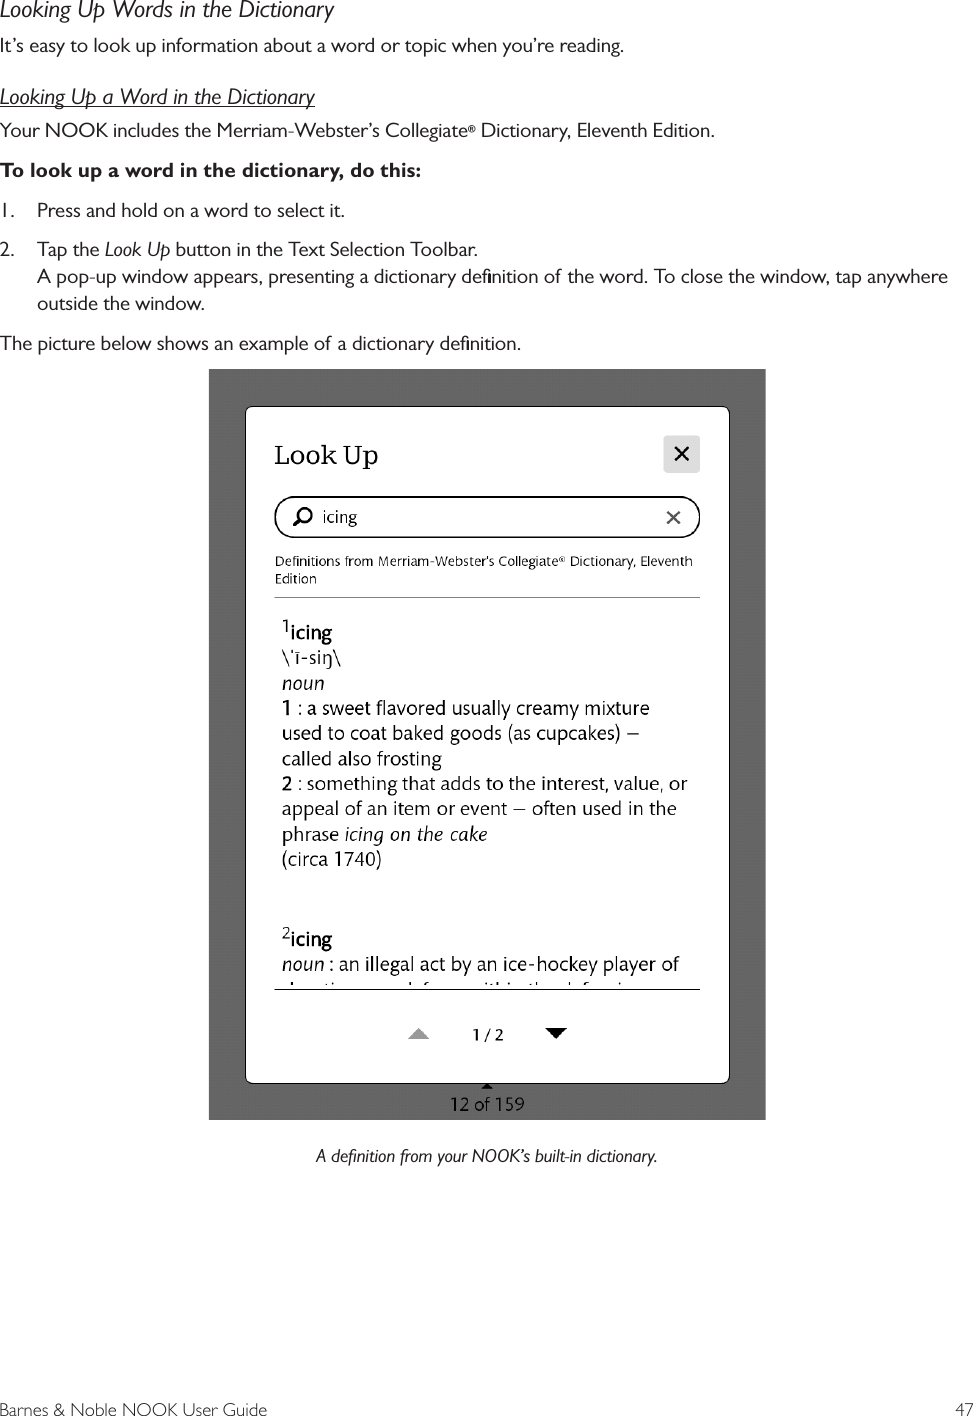 Nook user guide manual for iphone 6 plus